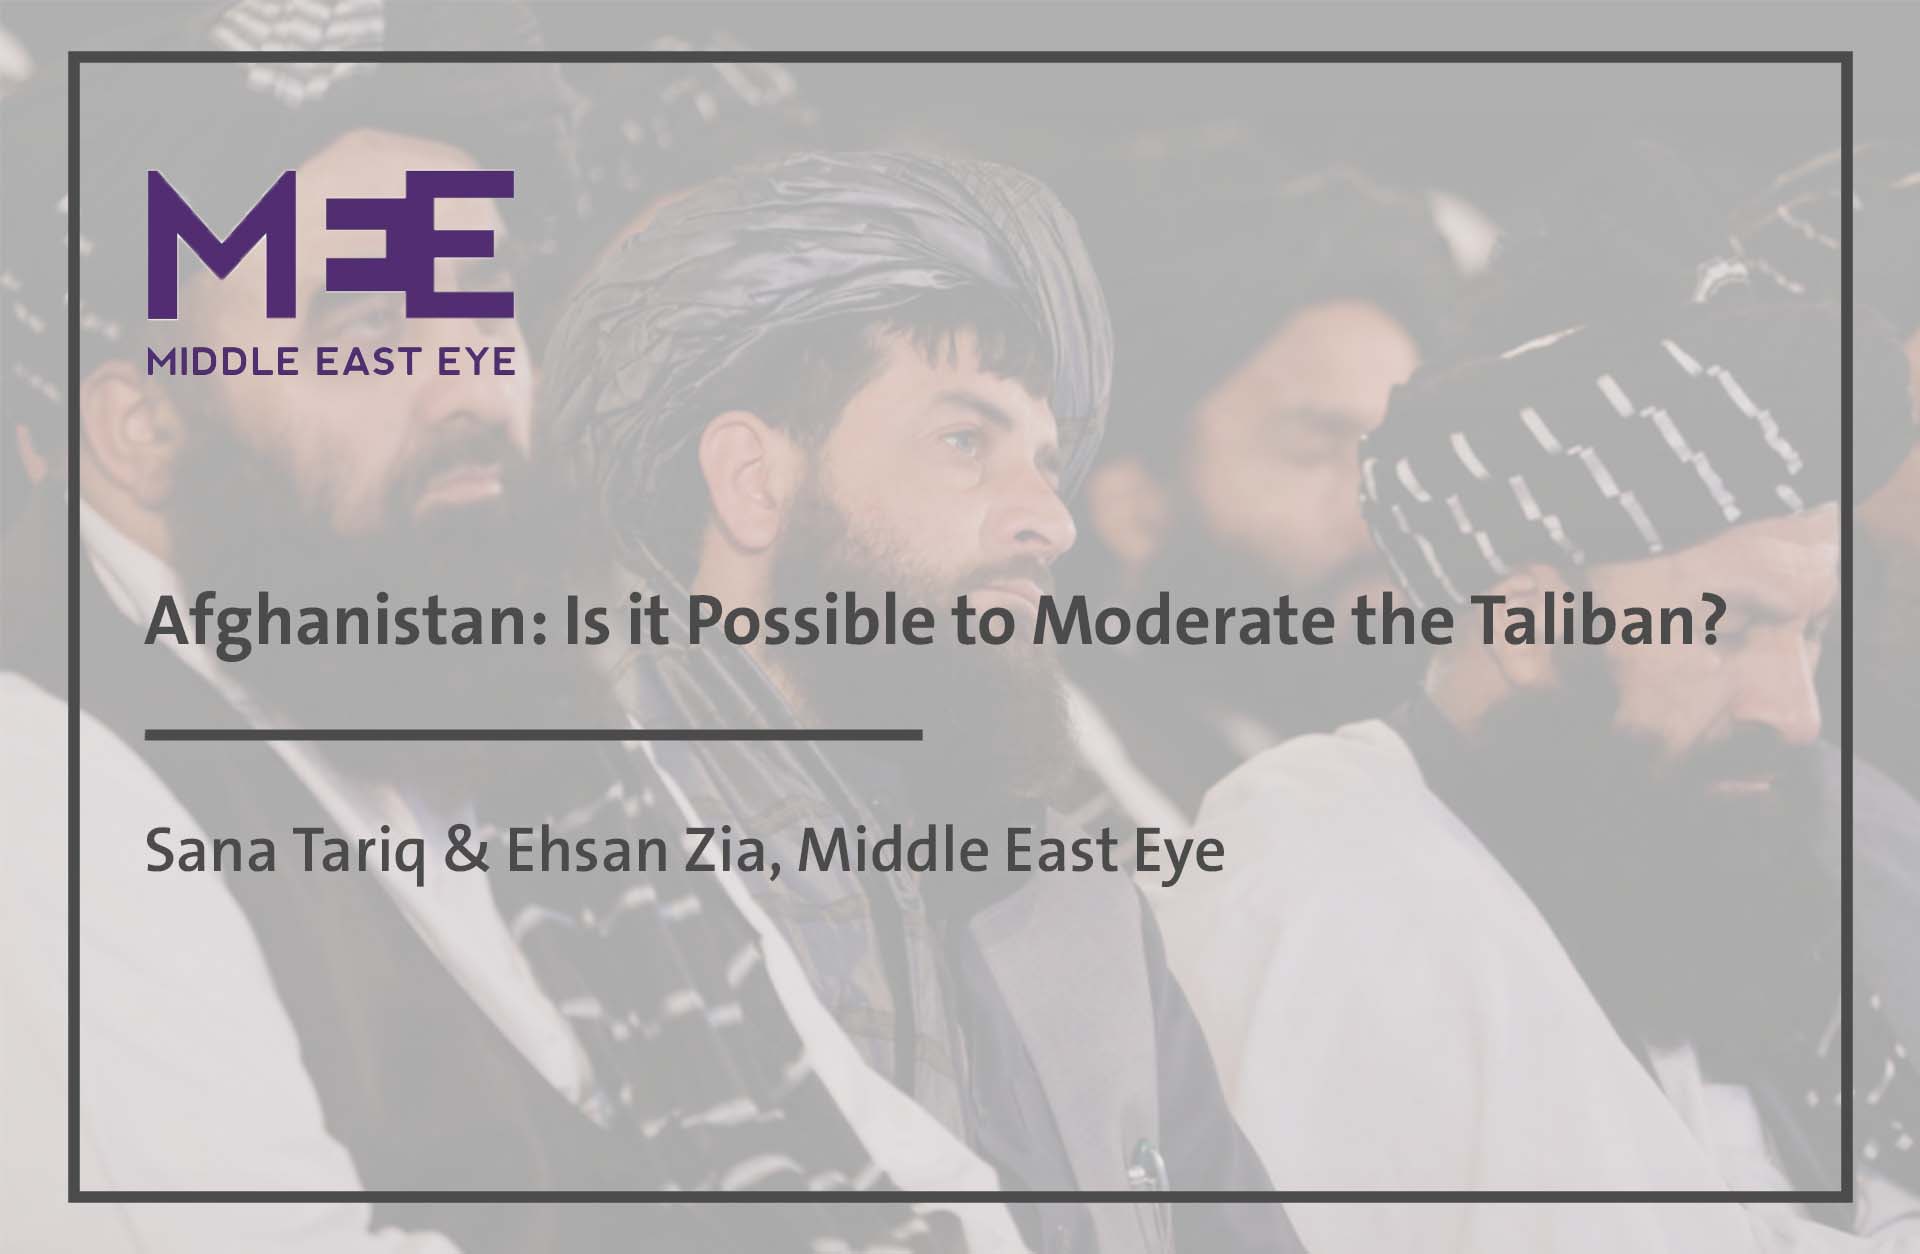 one year under the rule of the Taliban 